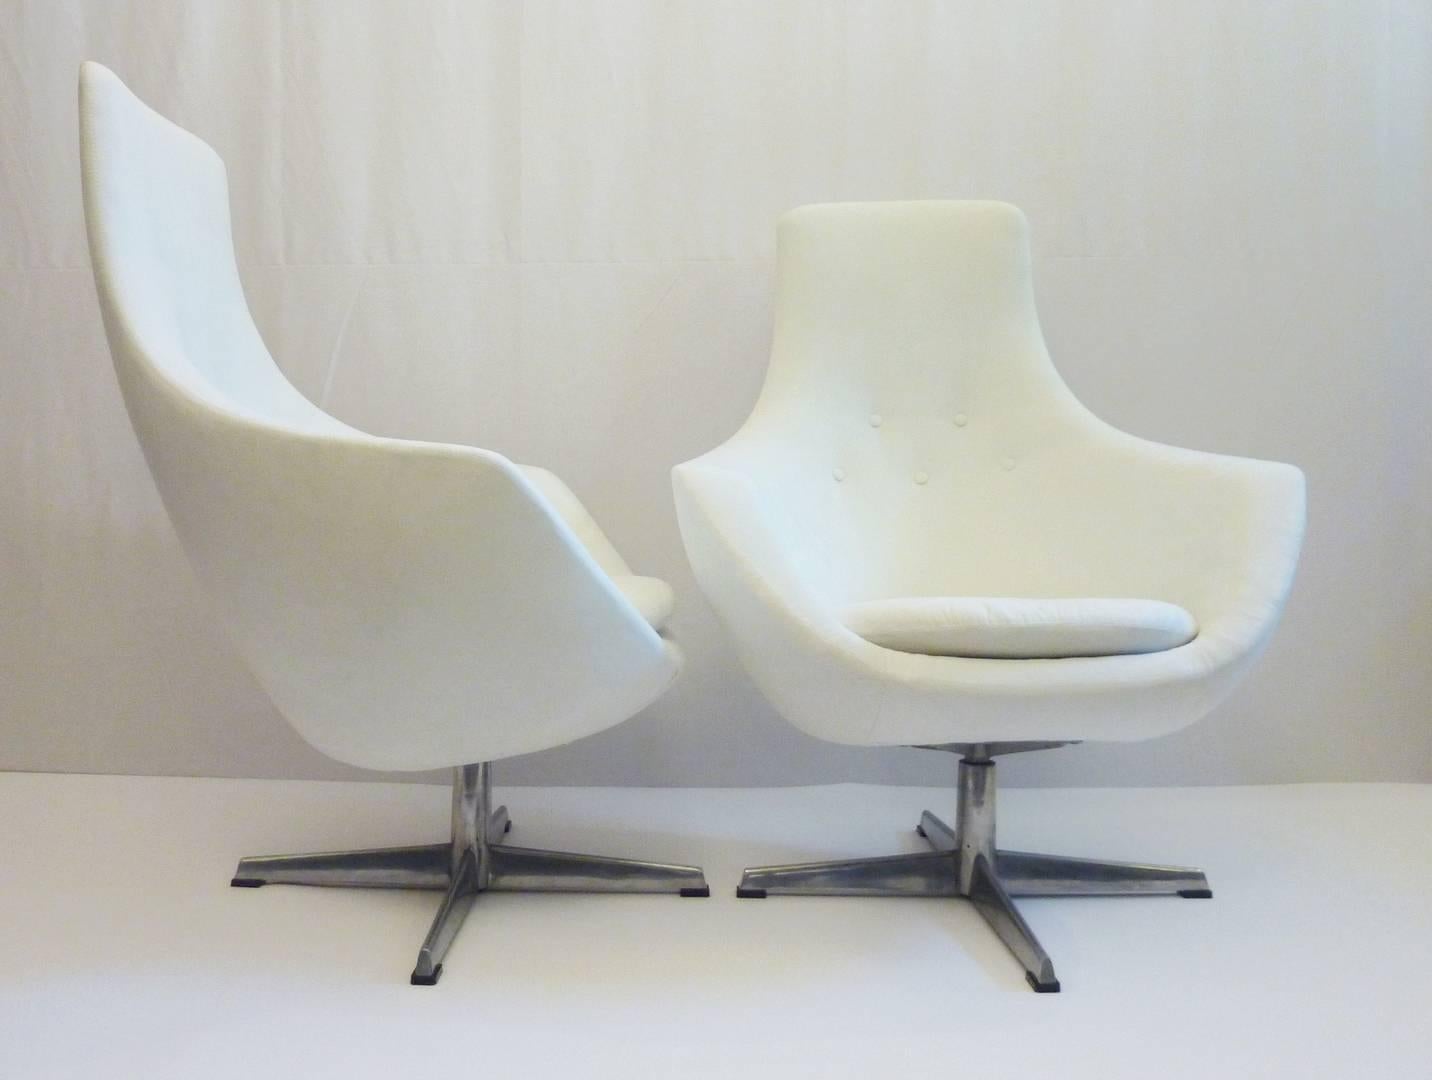 A pair of comfortable armchairs recently reupholstered in white faux suede. The swivel mechanism works excellent and the chair in itself is super lightweight.